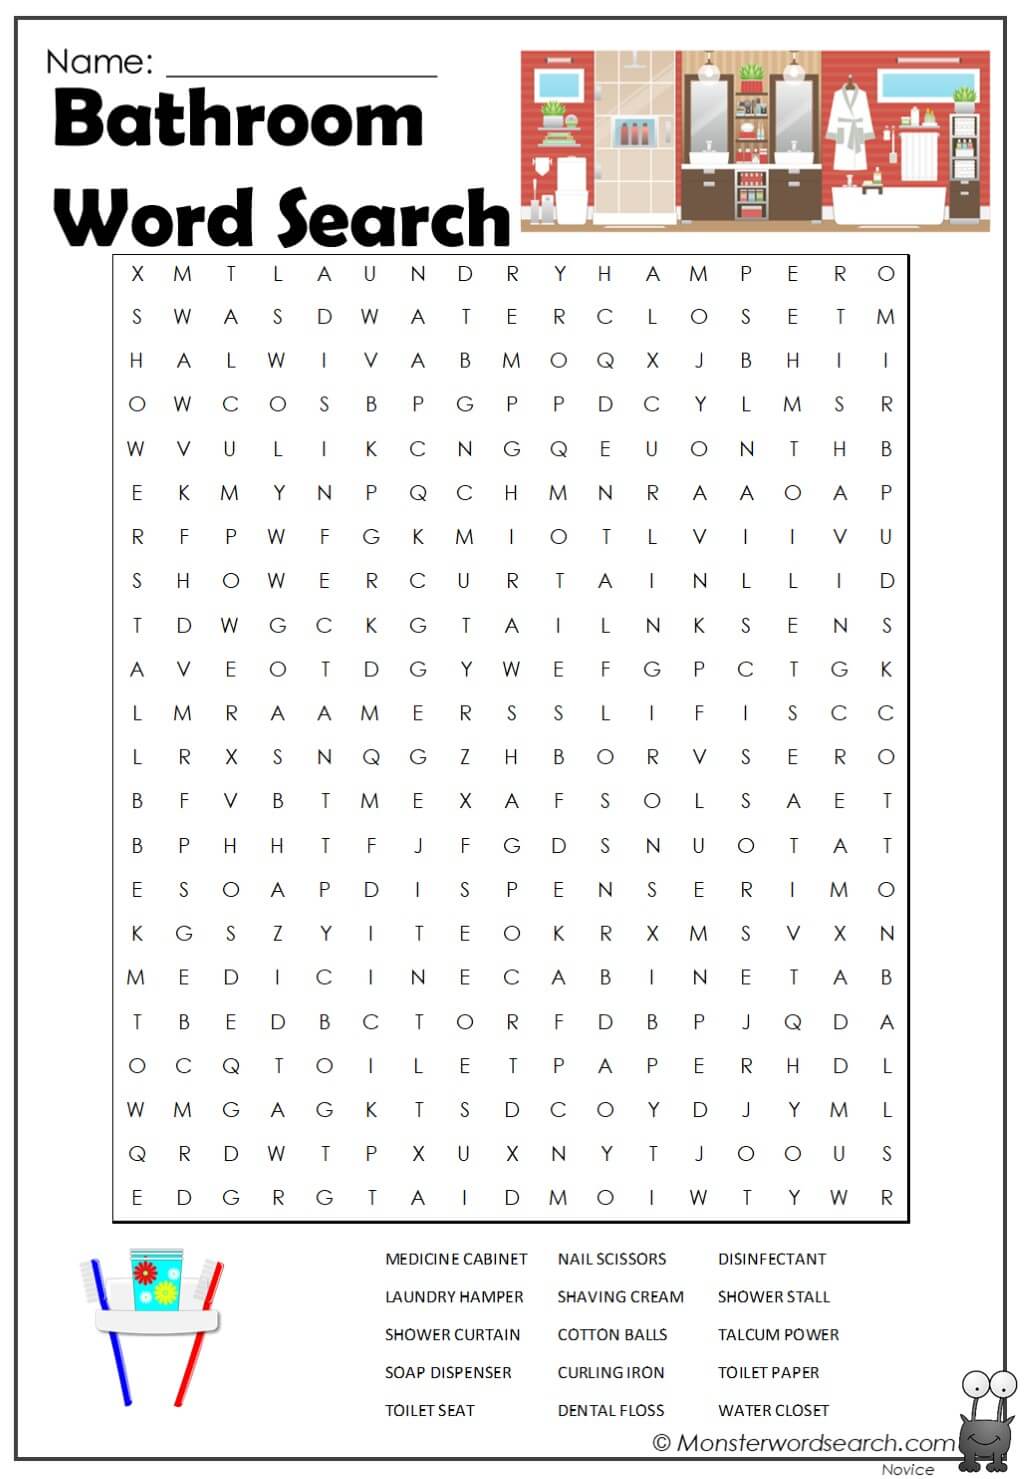 7 Cool Bathroom Word Searches Kitty Baby Love